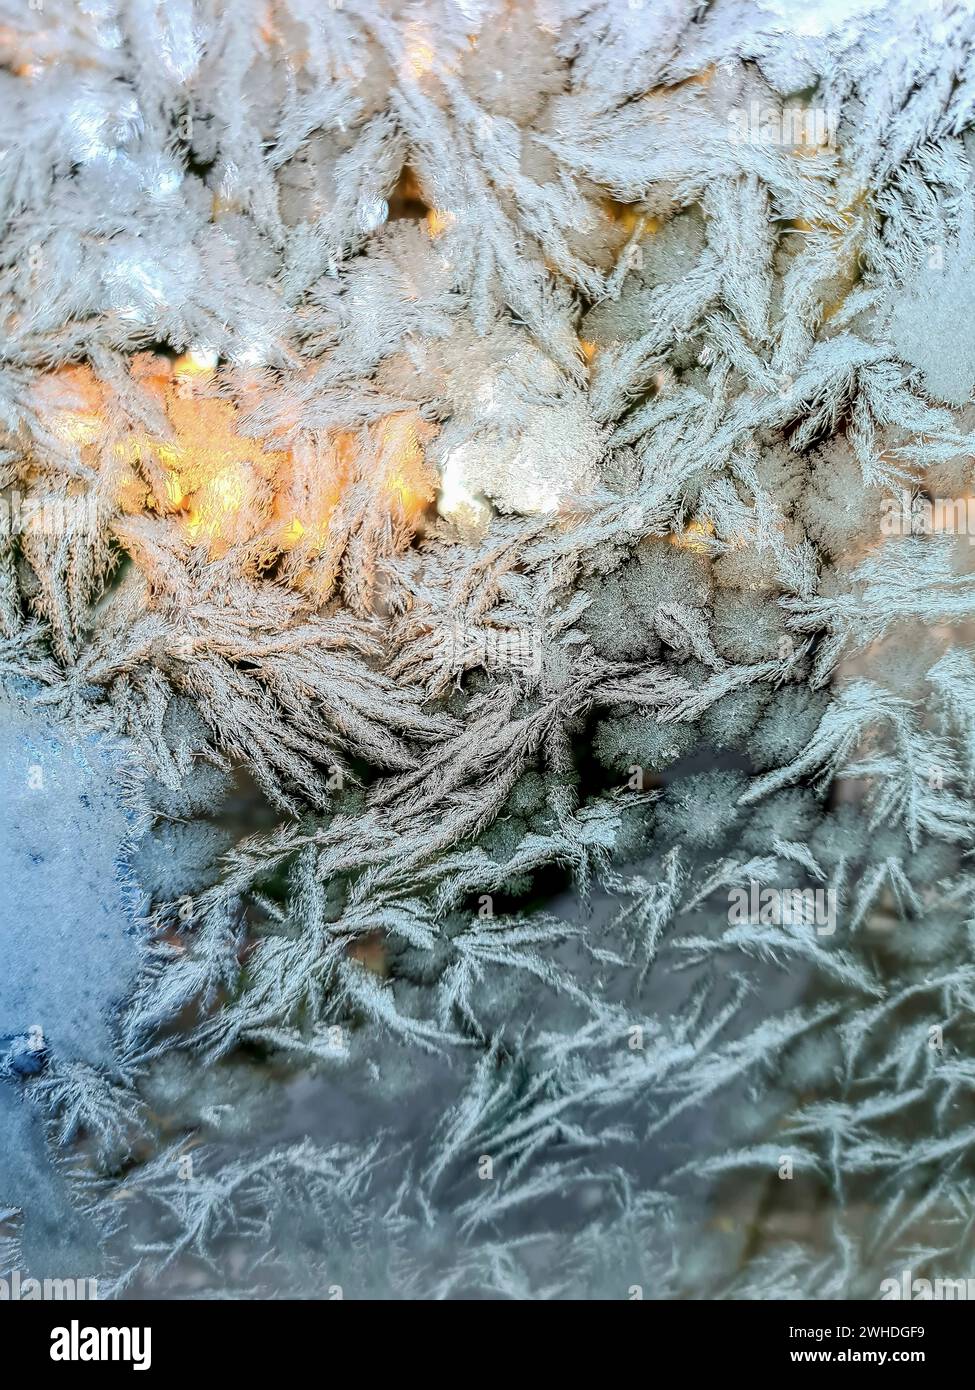 Ice flowers on the window in winter when it's freezing cold outside Stock Photo